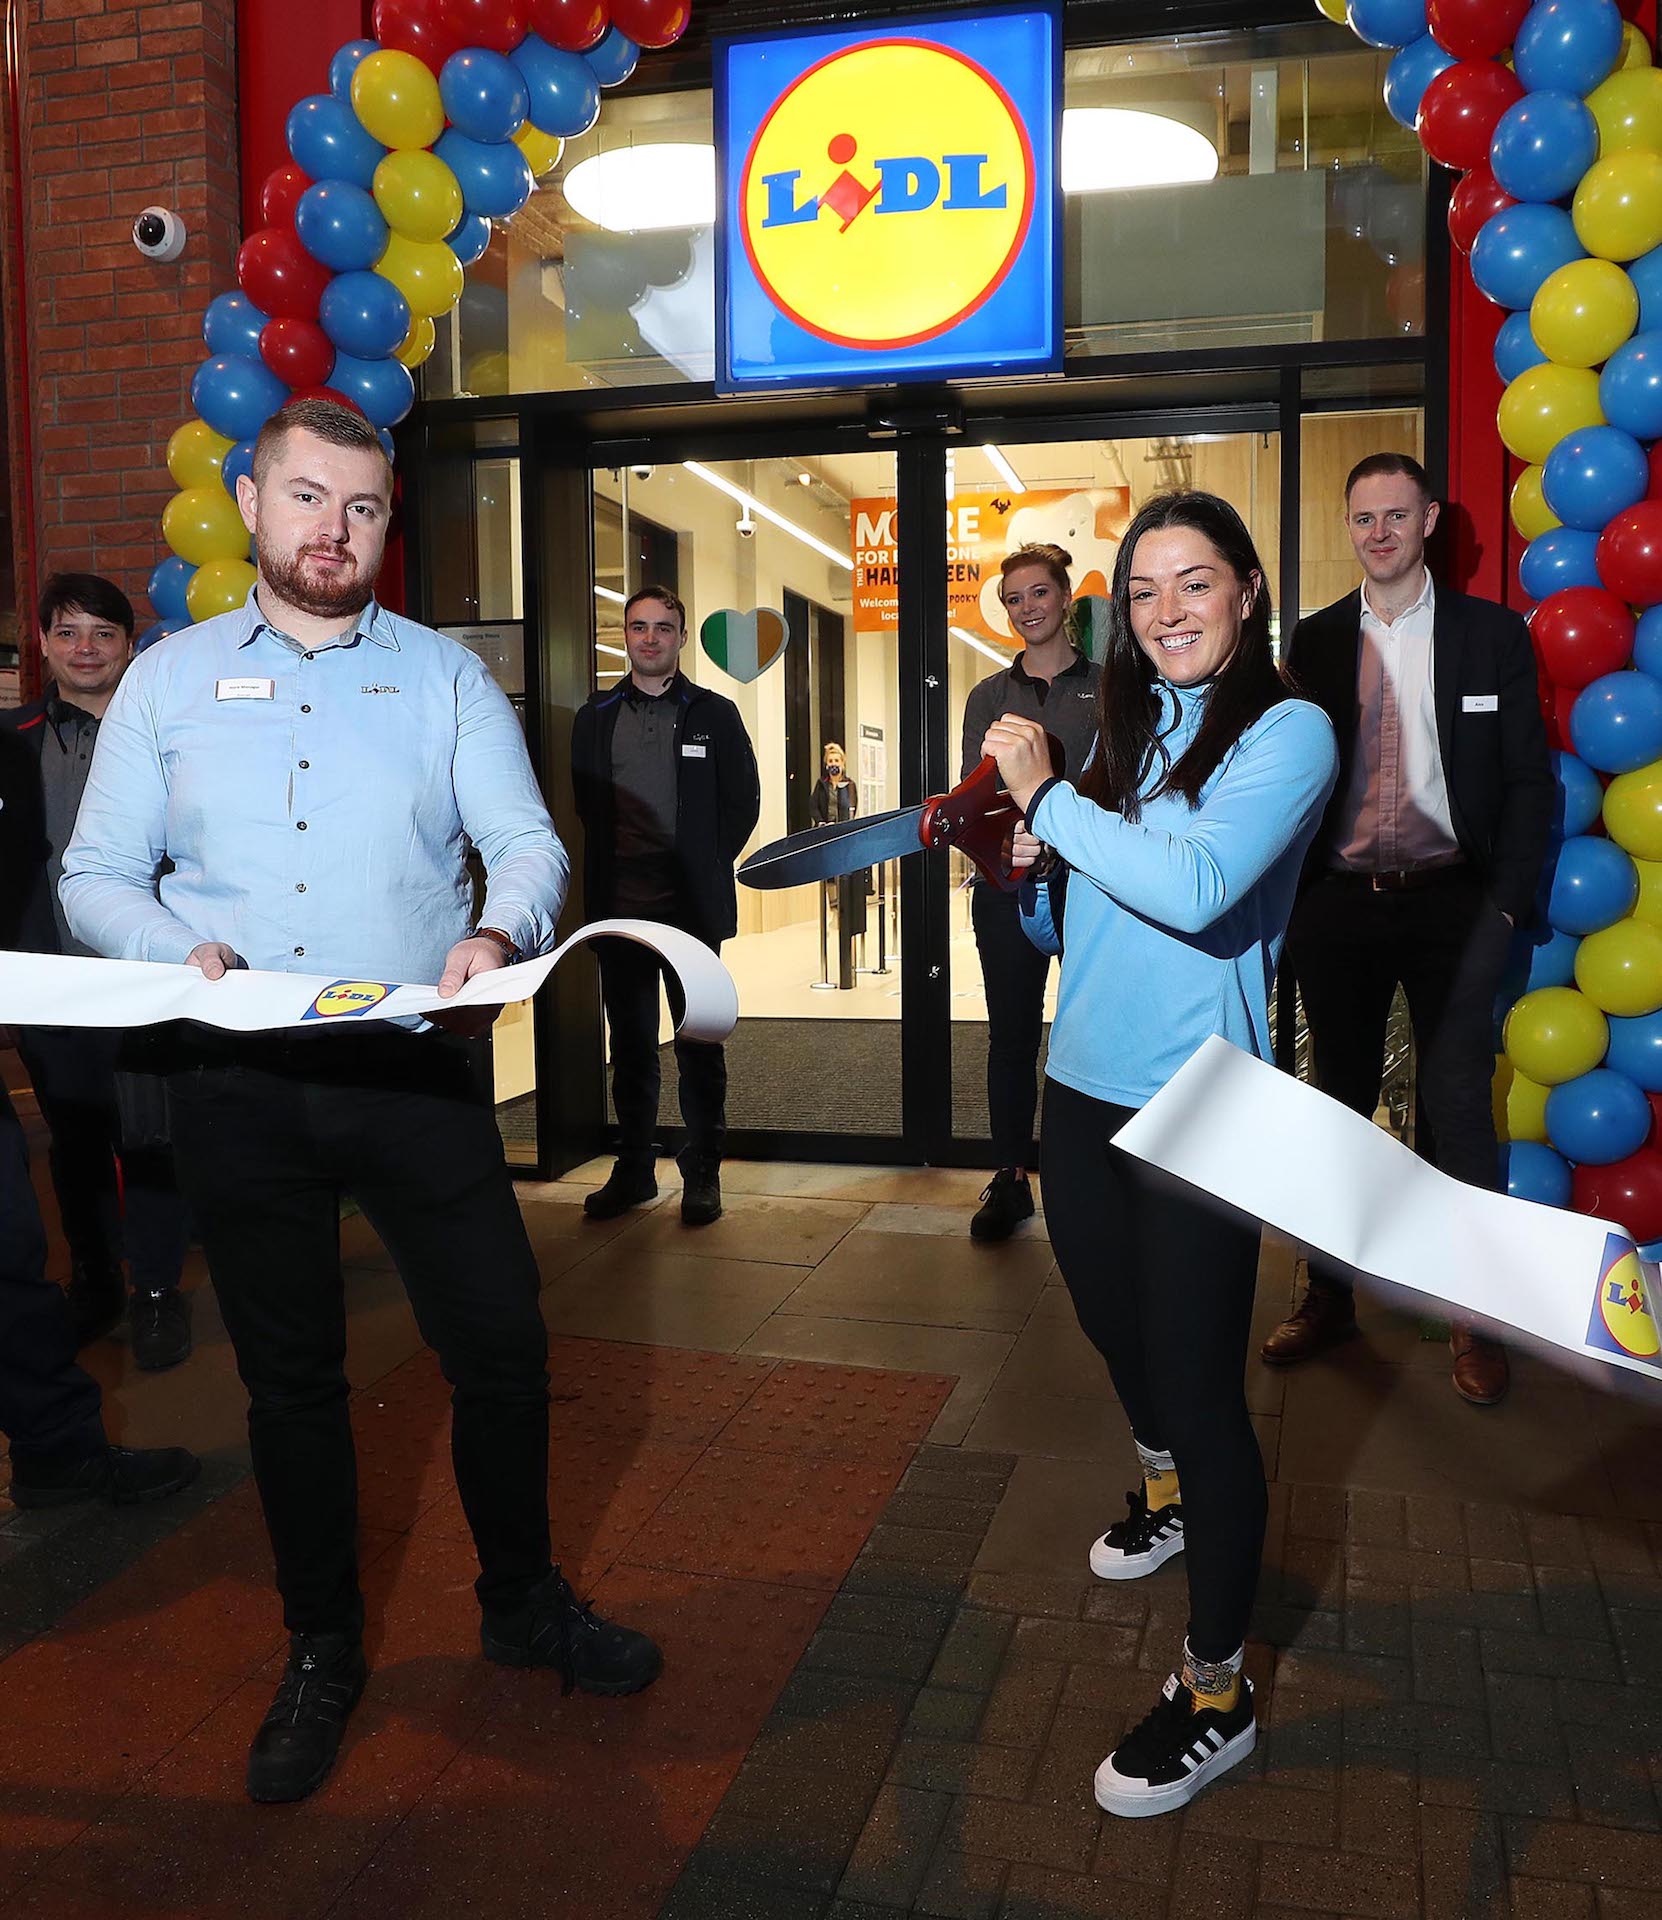 Lidl Ireland Opens New Aungier Street Store with €3 Million Investment and Creation of 24 Jobs